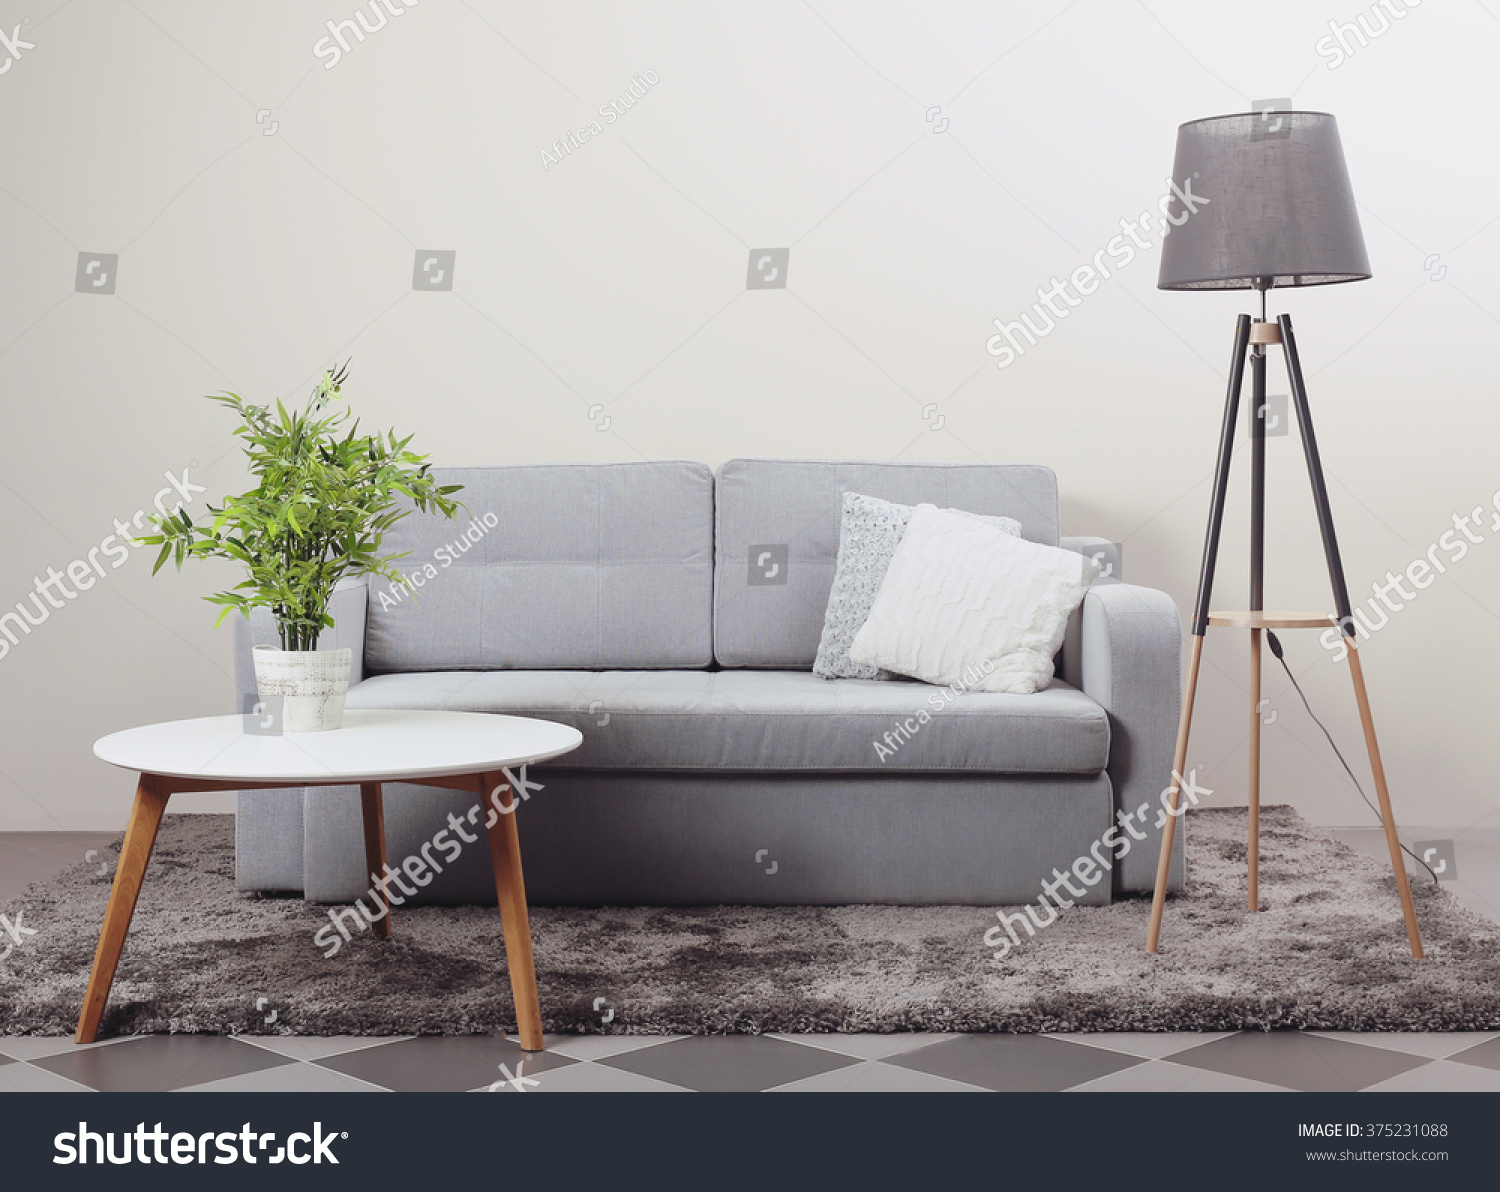 Modern Furniture In The Room Stock Photo 375231088 : Shutterstock